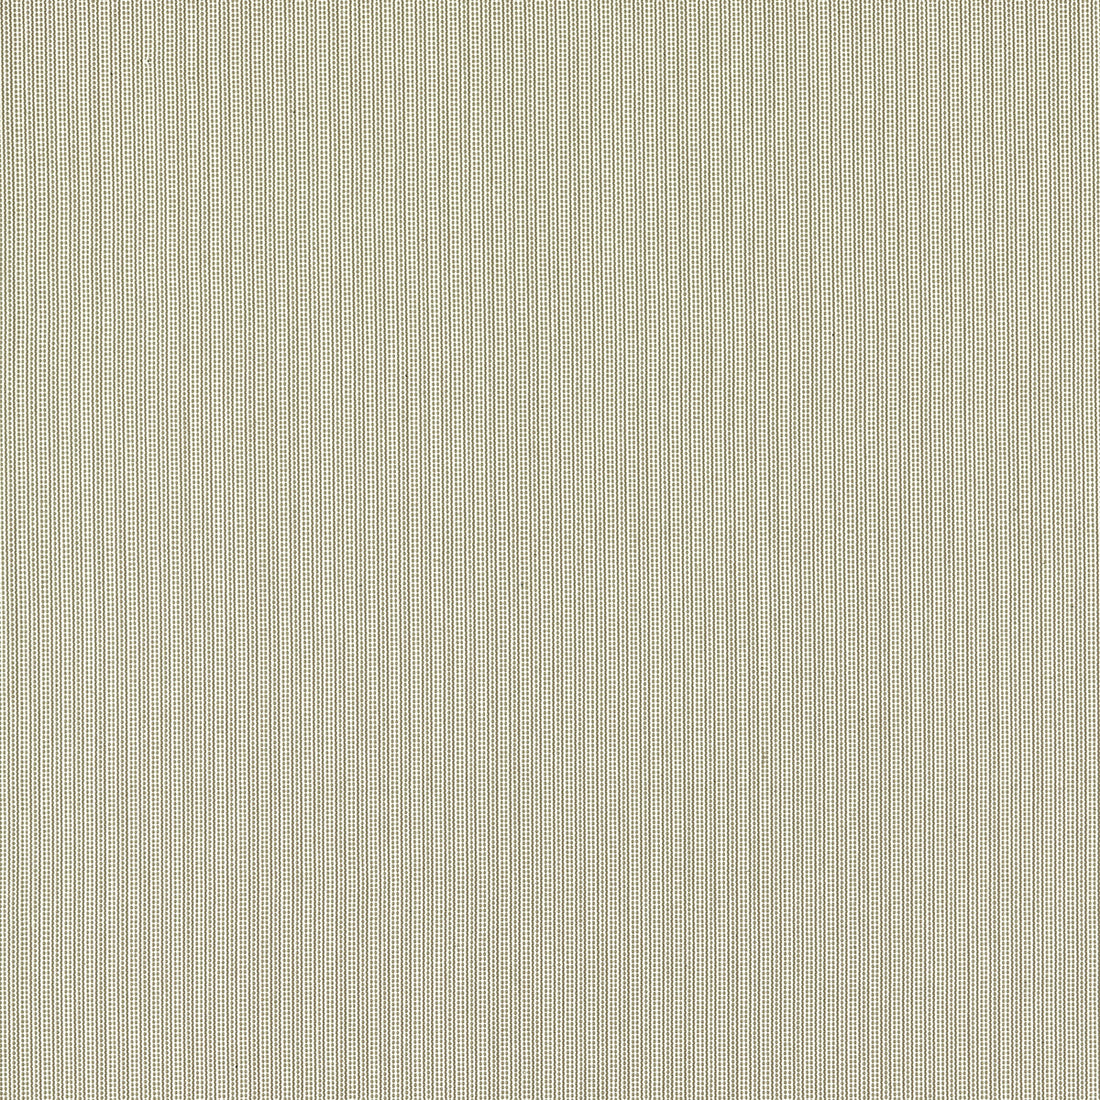 Spencer fabric in linen color - pattern F1504/03.CAC.0 - by Clarke And Clarke in the Clarke &amp; Clarke Edgeworth collection